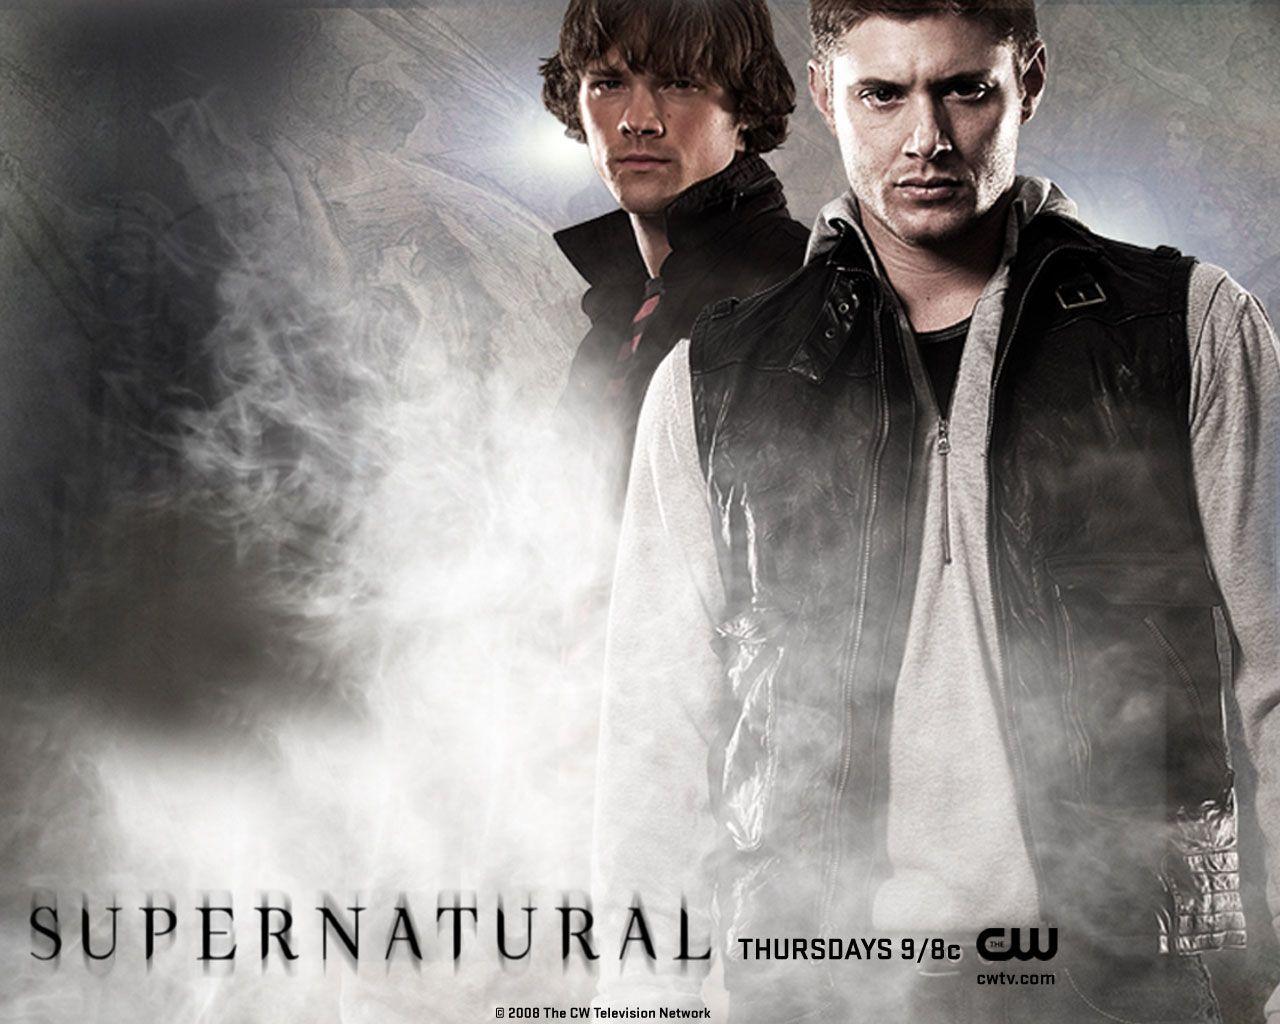 New Official Wallpaper from the CW for Supernatural Season 4